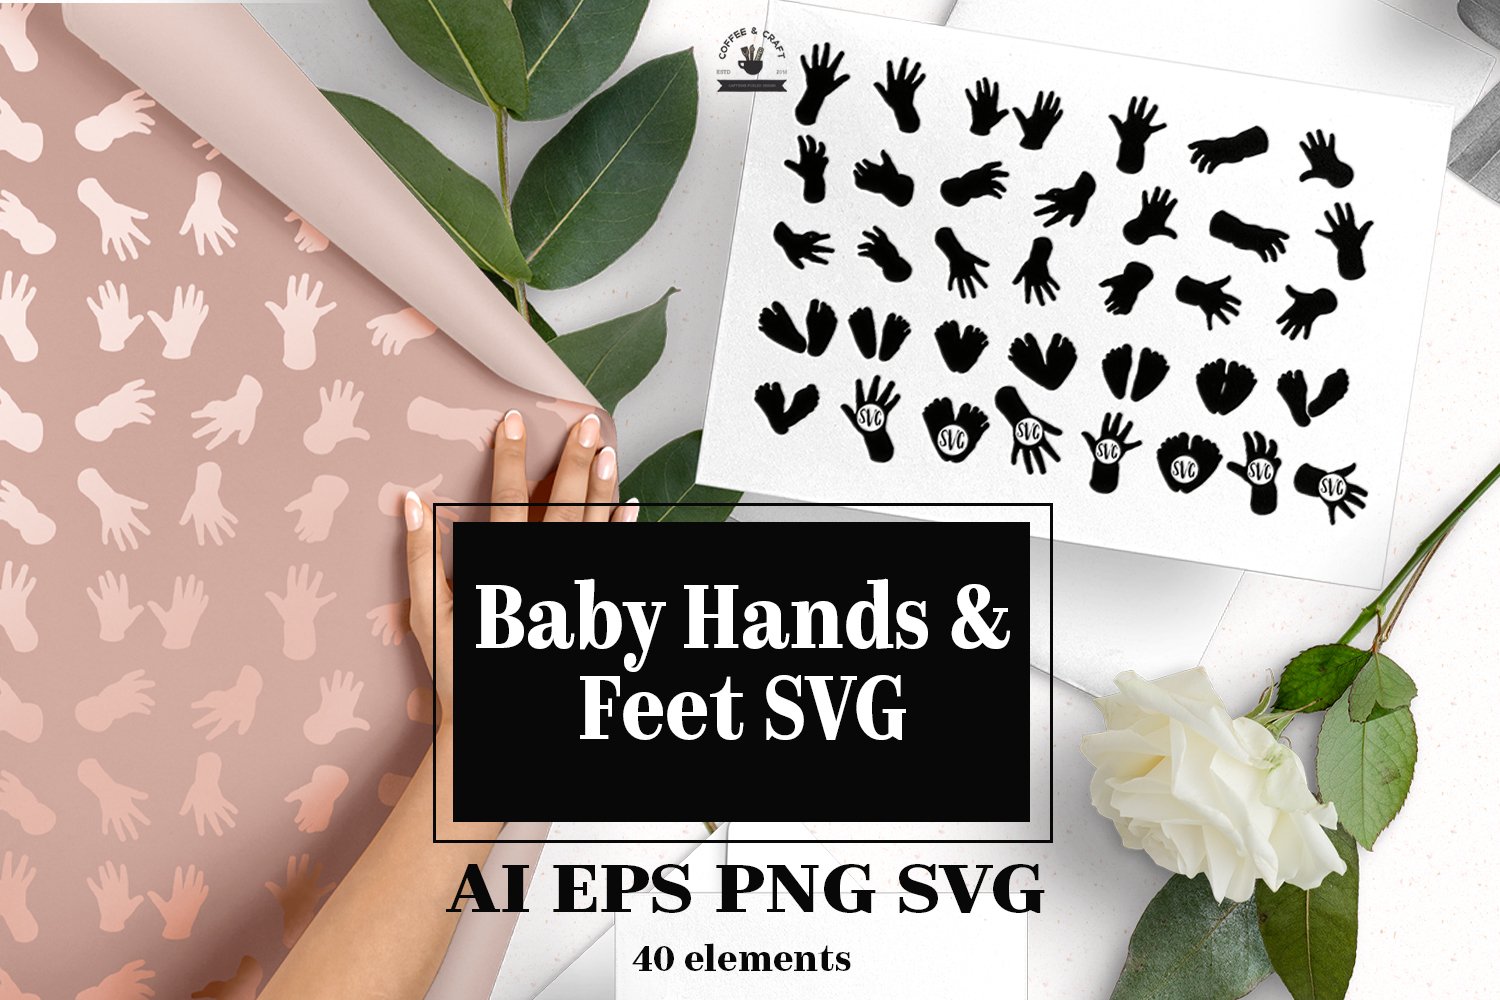 Preview of a page with wrapping paper or wallpaper on the theme of children's feet and hands.